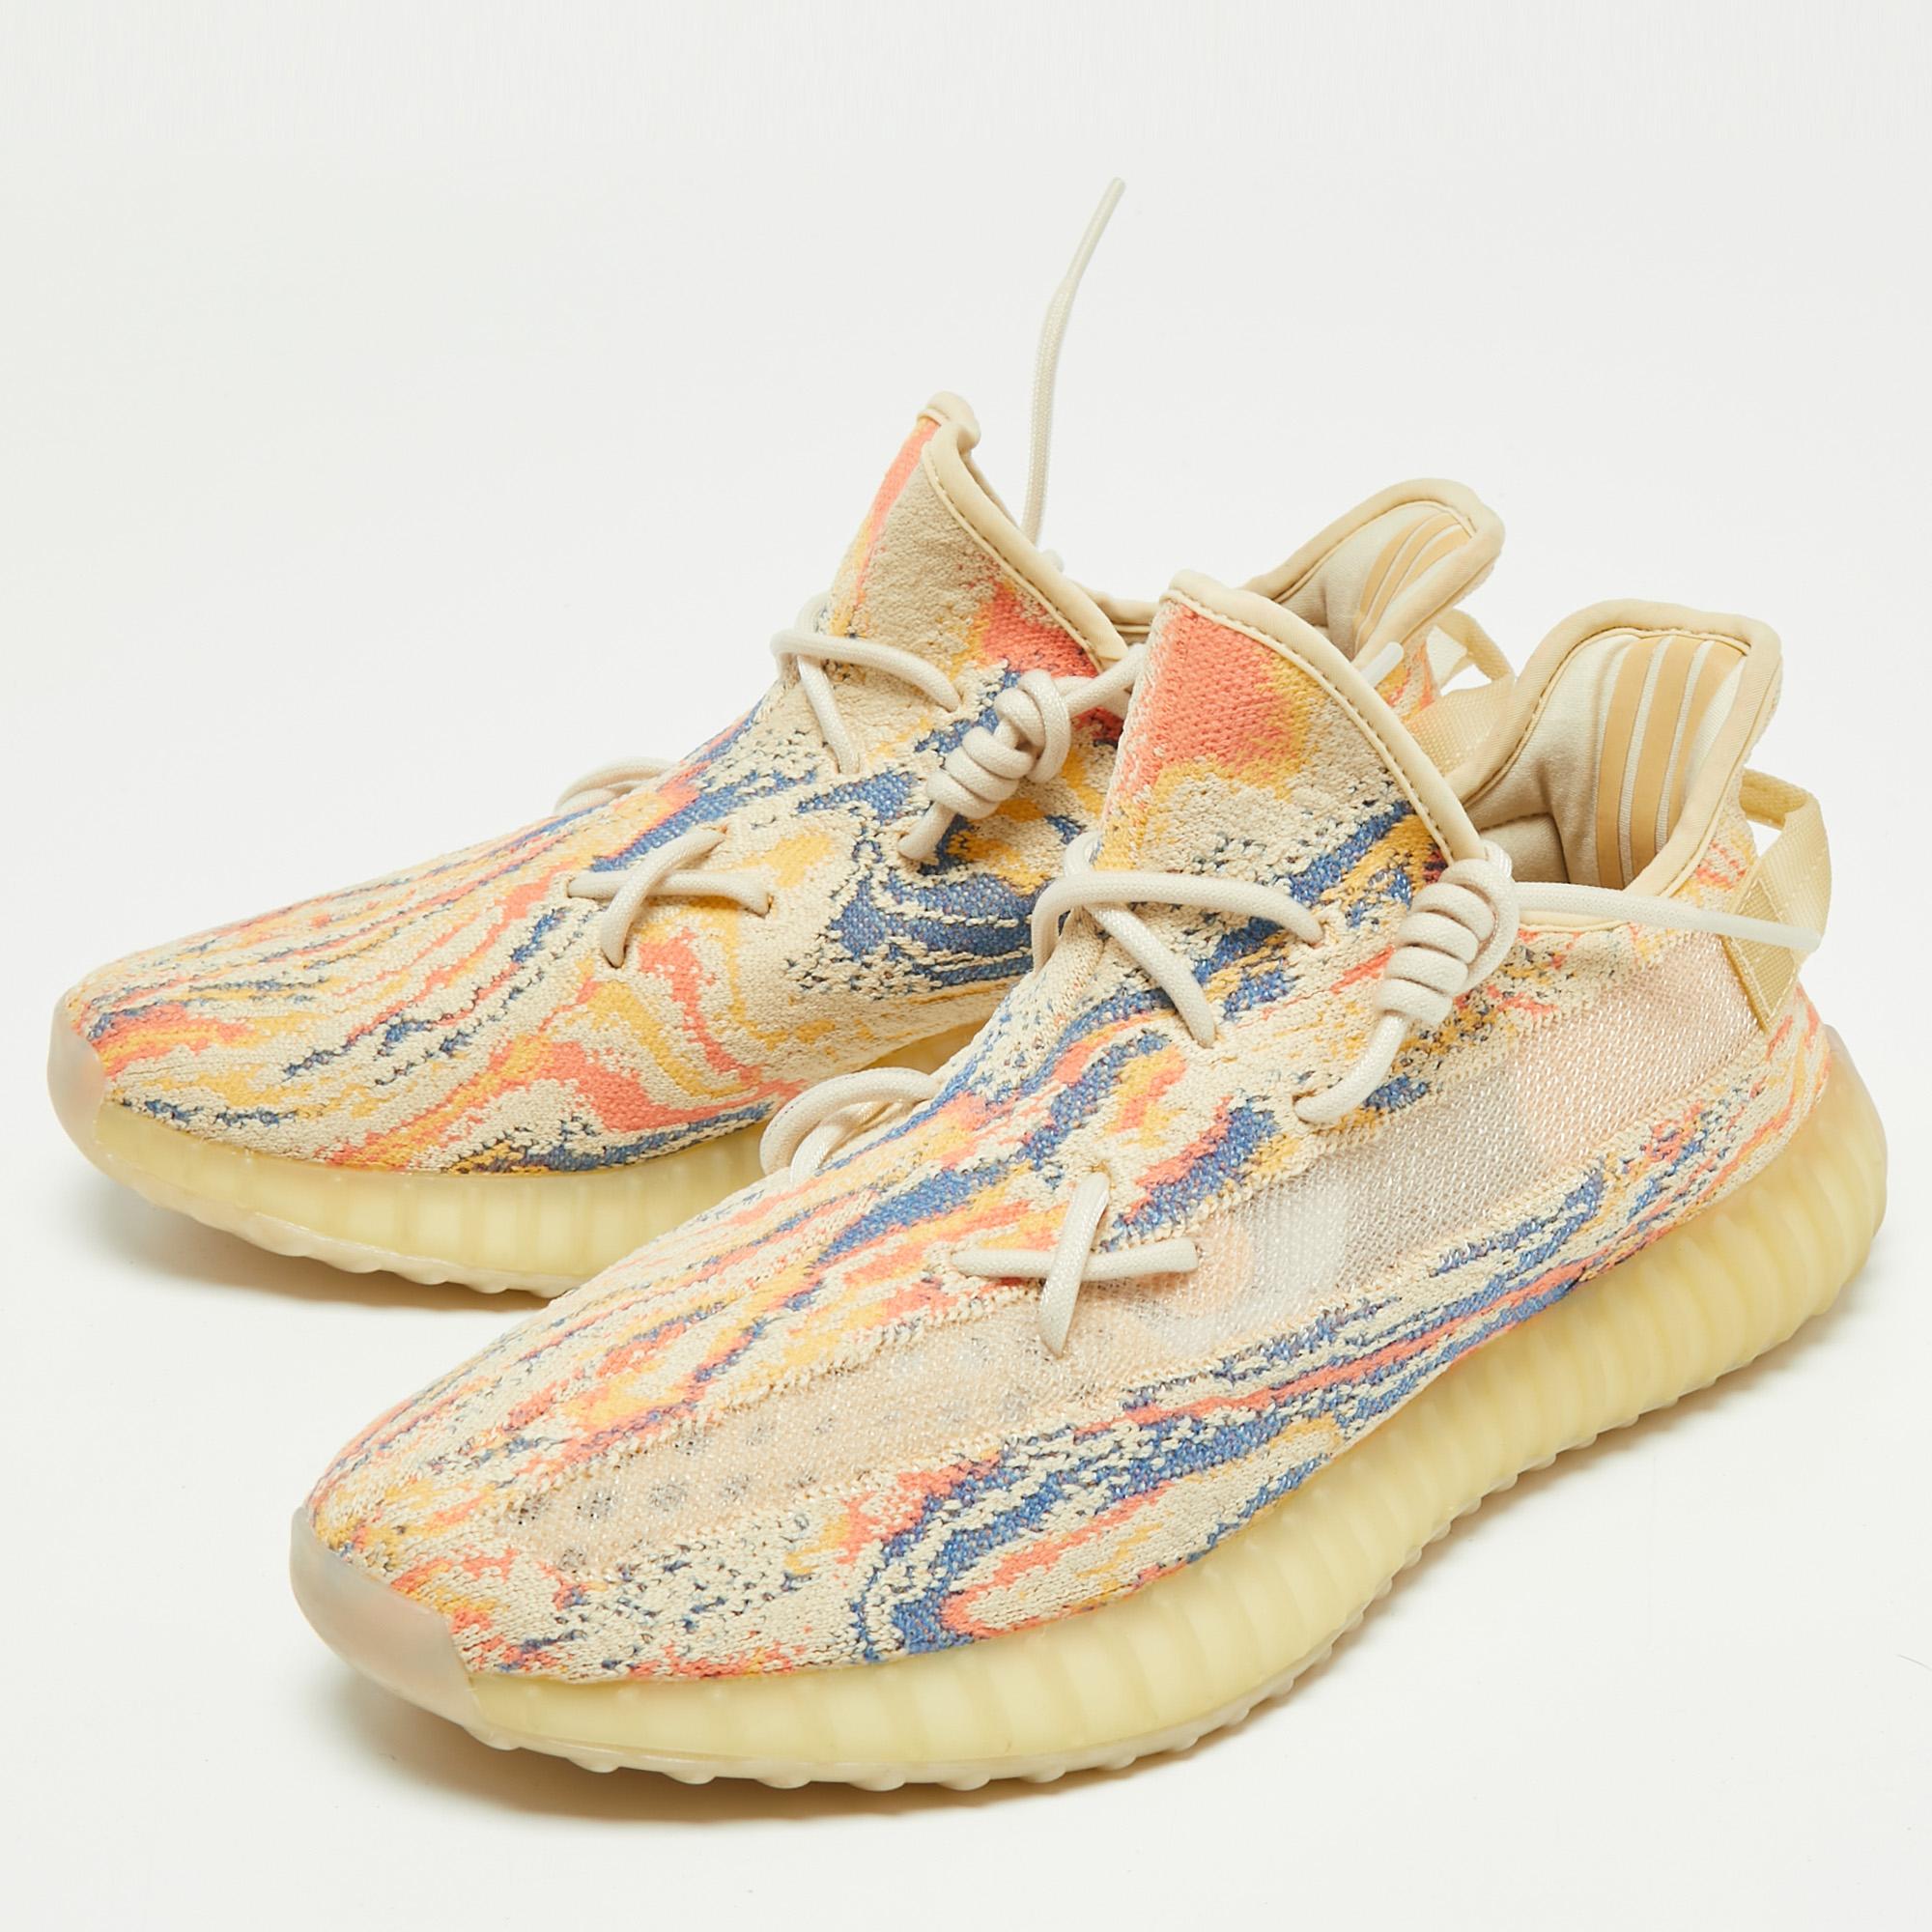 

Yeezy Multicolor Knit Fabric Boost-350-v2-Mx-Oat Sneakers Size 45 1/3